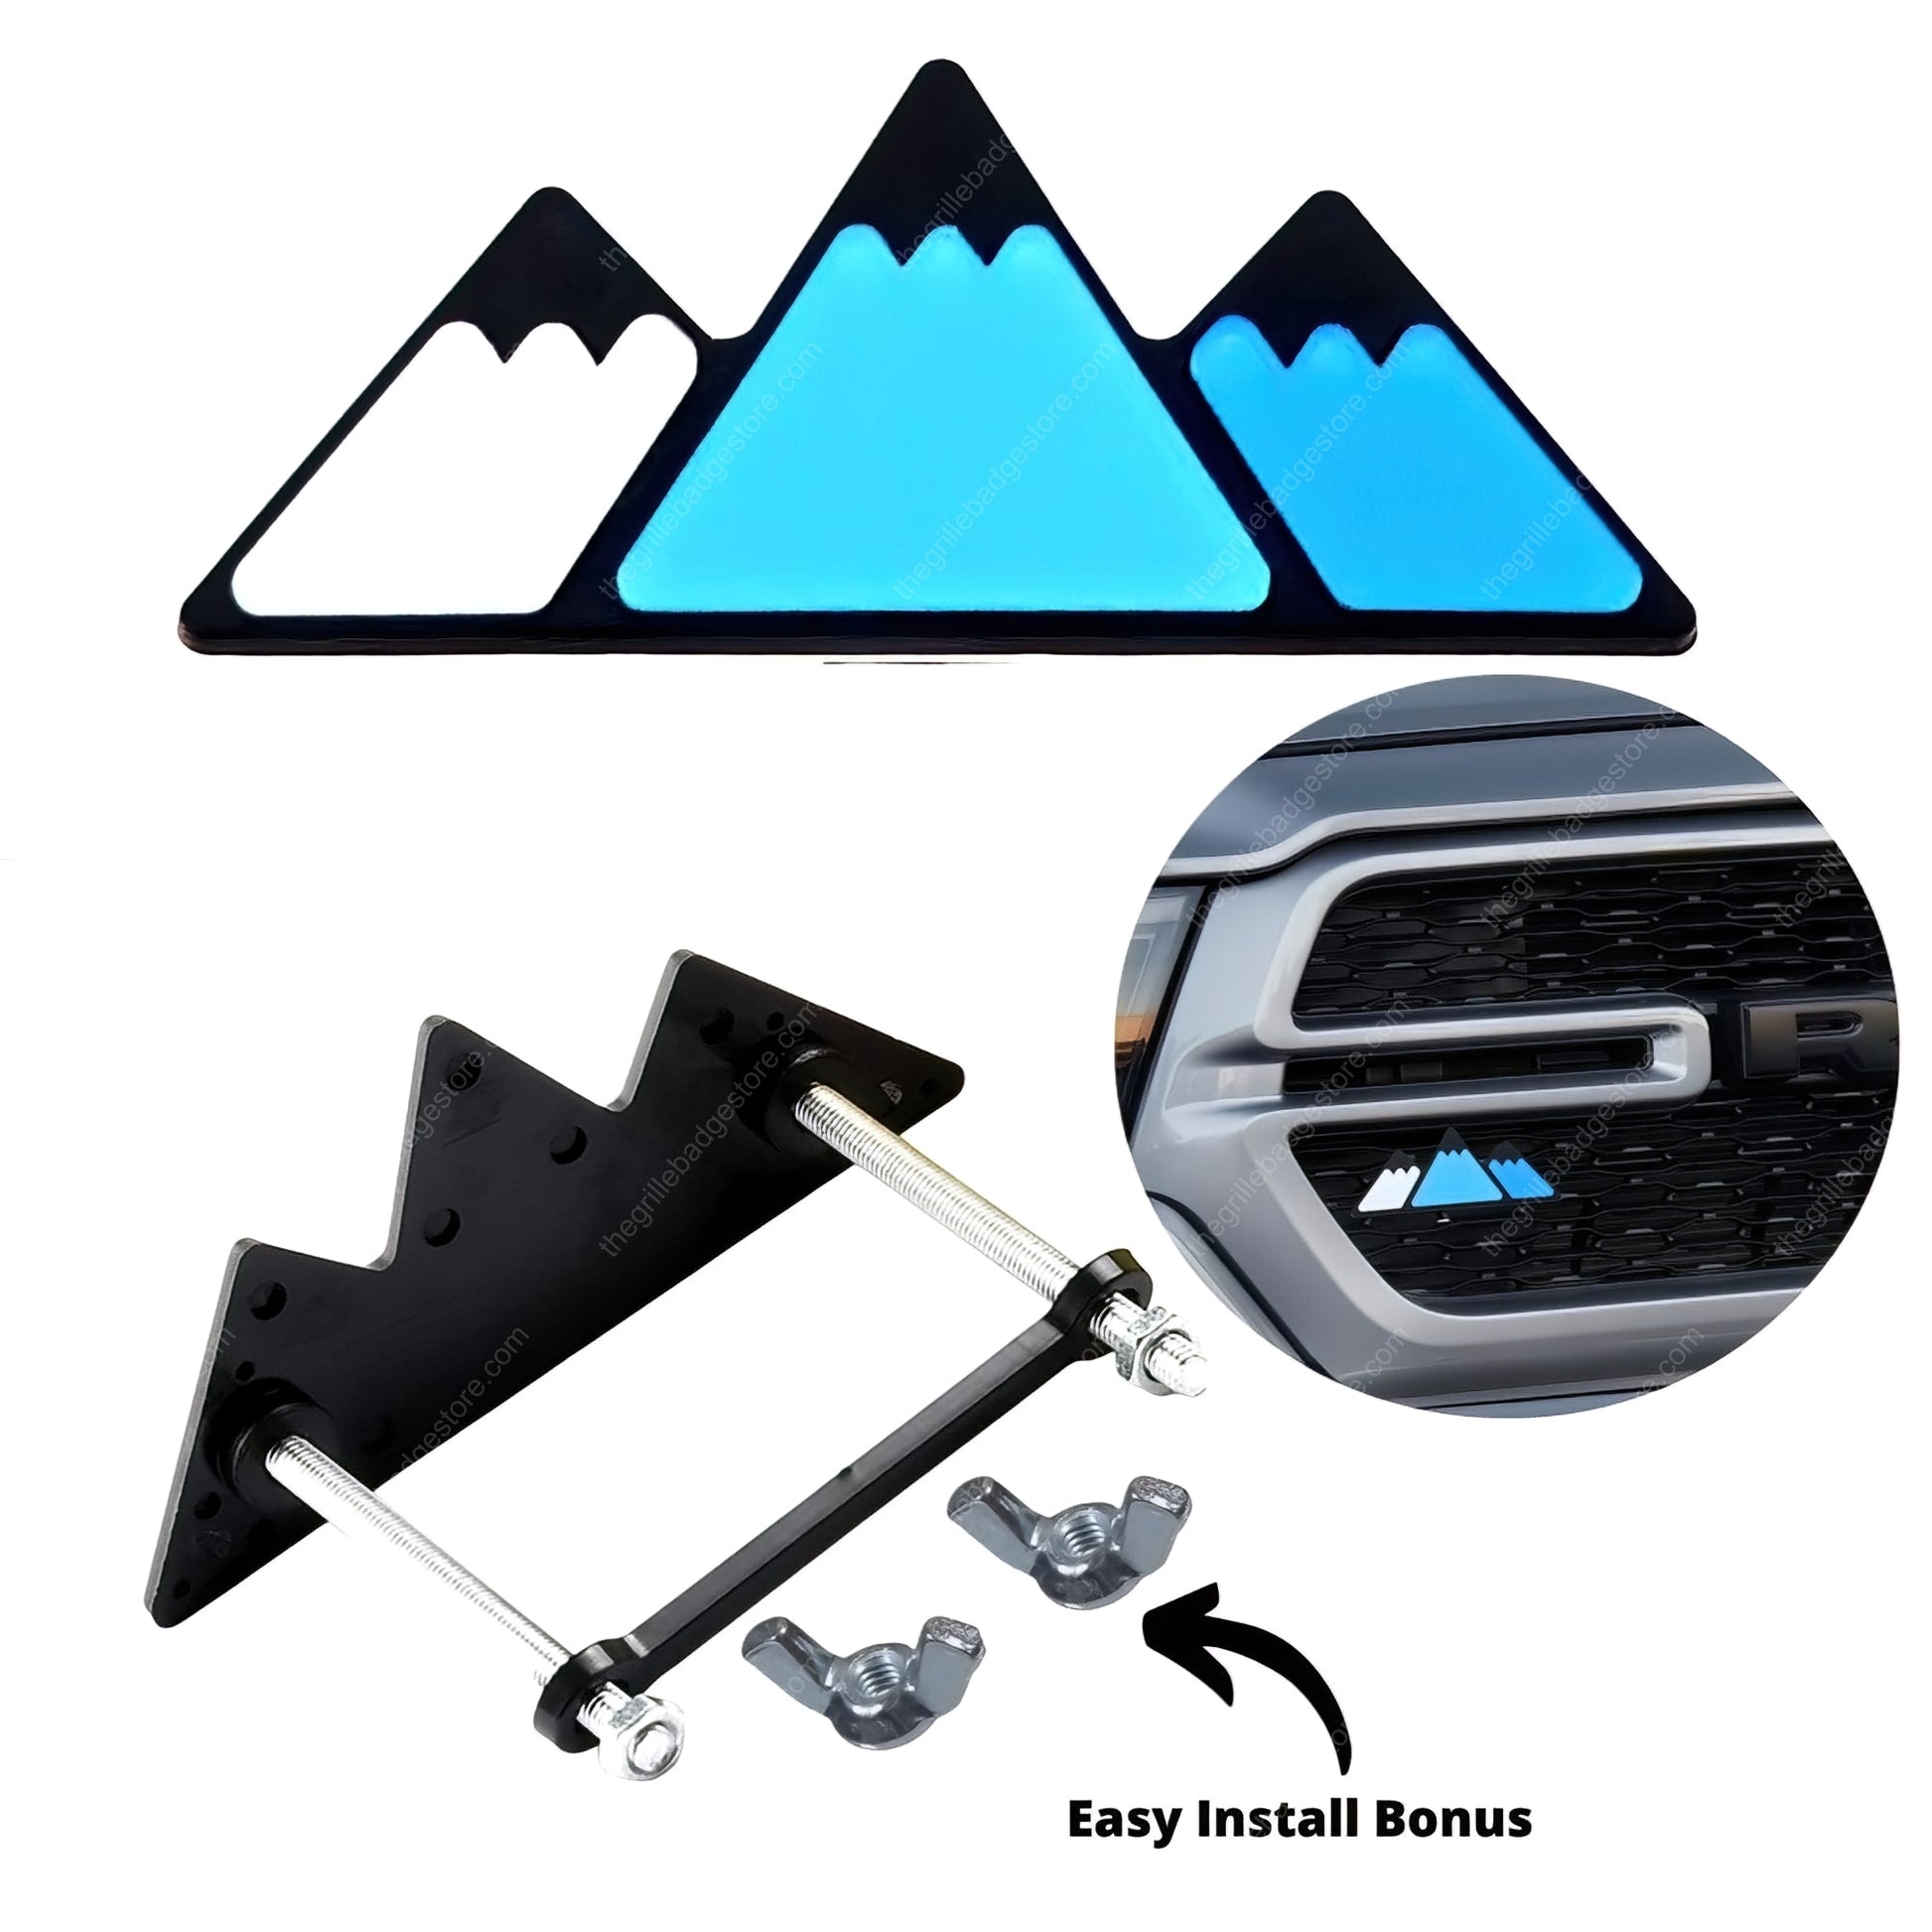 Acrylic, not Vinyl, Standard Grille Badge Compatible With Most Taco (Tacoma), FJ Cruiser, 4Runner, Tundra, Lexus GX. There is also a Black version for those who like to "black out their Tacoma or 4Runner Grille. This Tri Color badge is compatible on TRD Pro, TEQ and fits the Tacoma, 4Runner Instagram lifestyle of camping adventure and photography. Available at thegrillebadgestore.com, grillebadgeHQ, where can I get a grille badge? Right here!